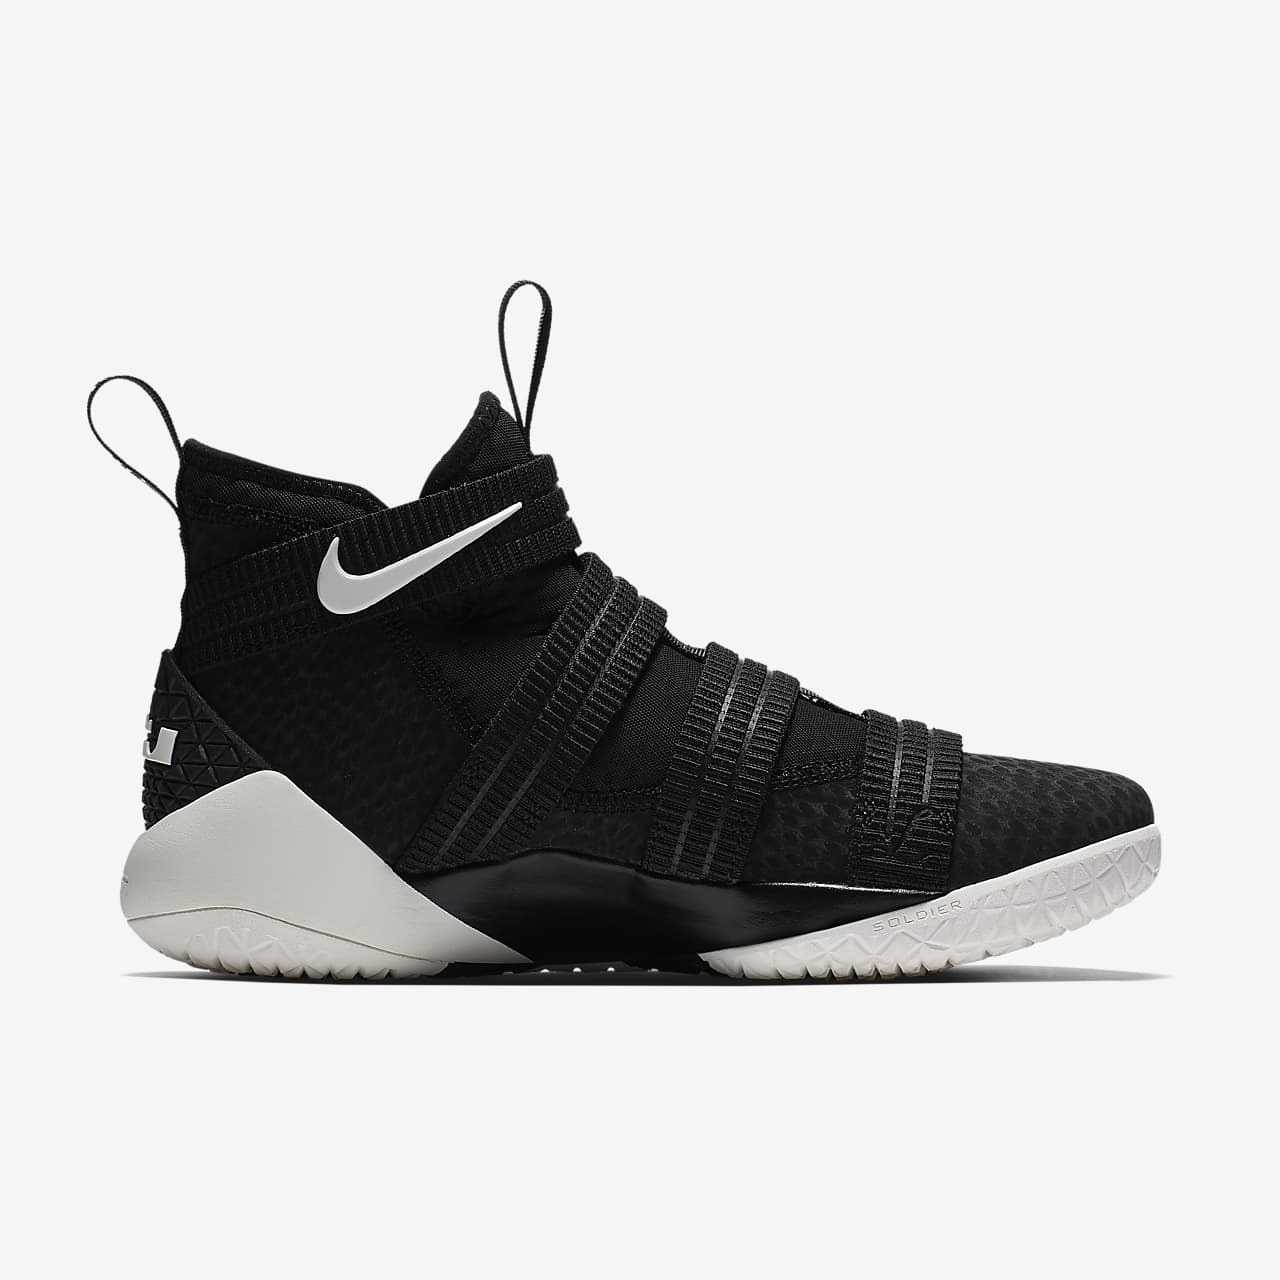 nike lebron soldier xi mens basketball shoes